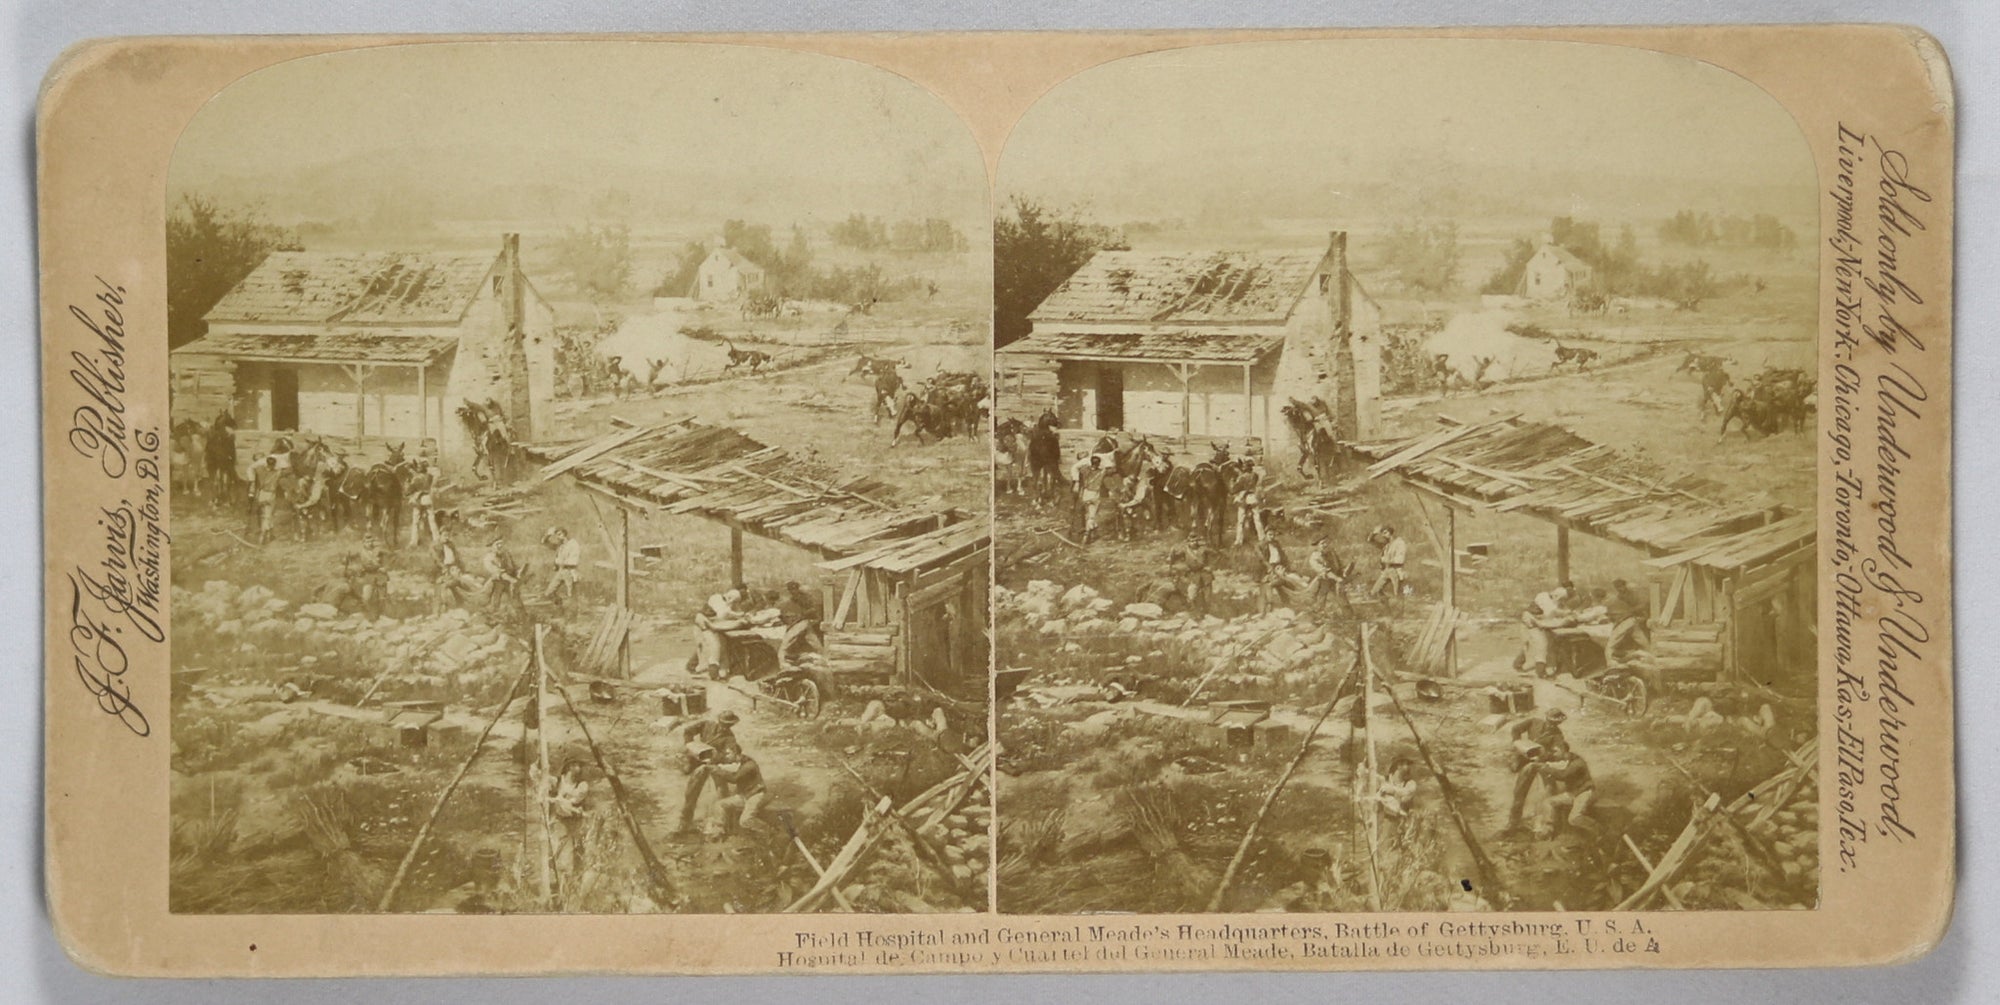 1863 Battle of Gettysburg – stereoscopic view Field Hospital and General Meade’s HQ